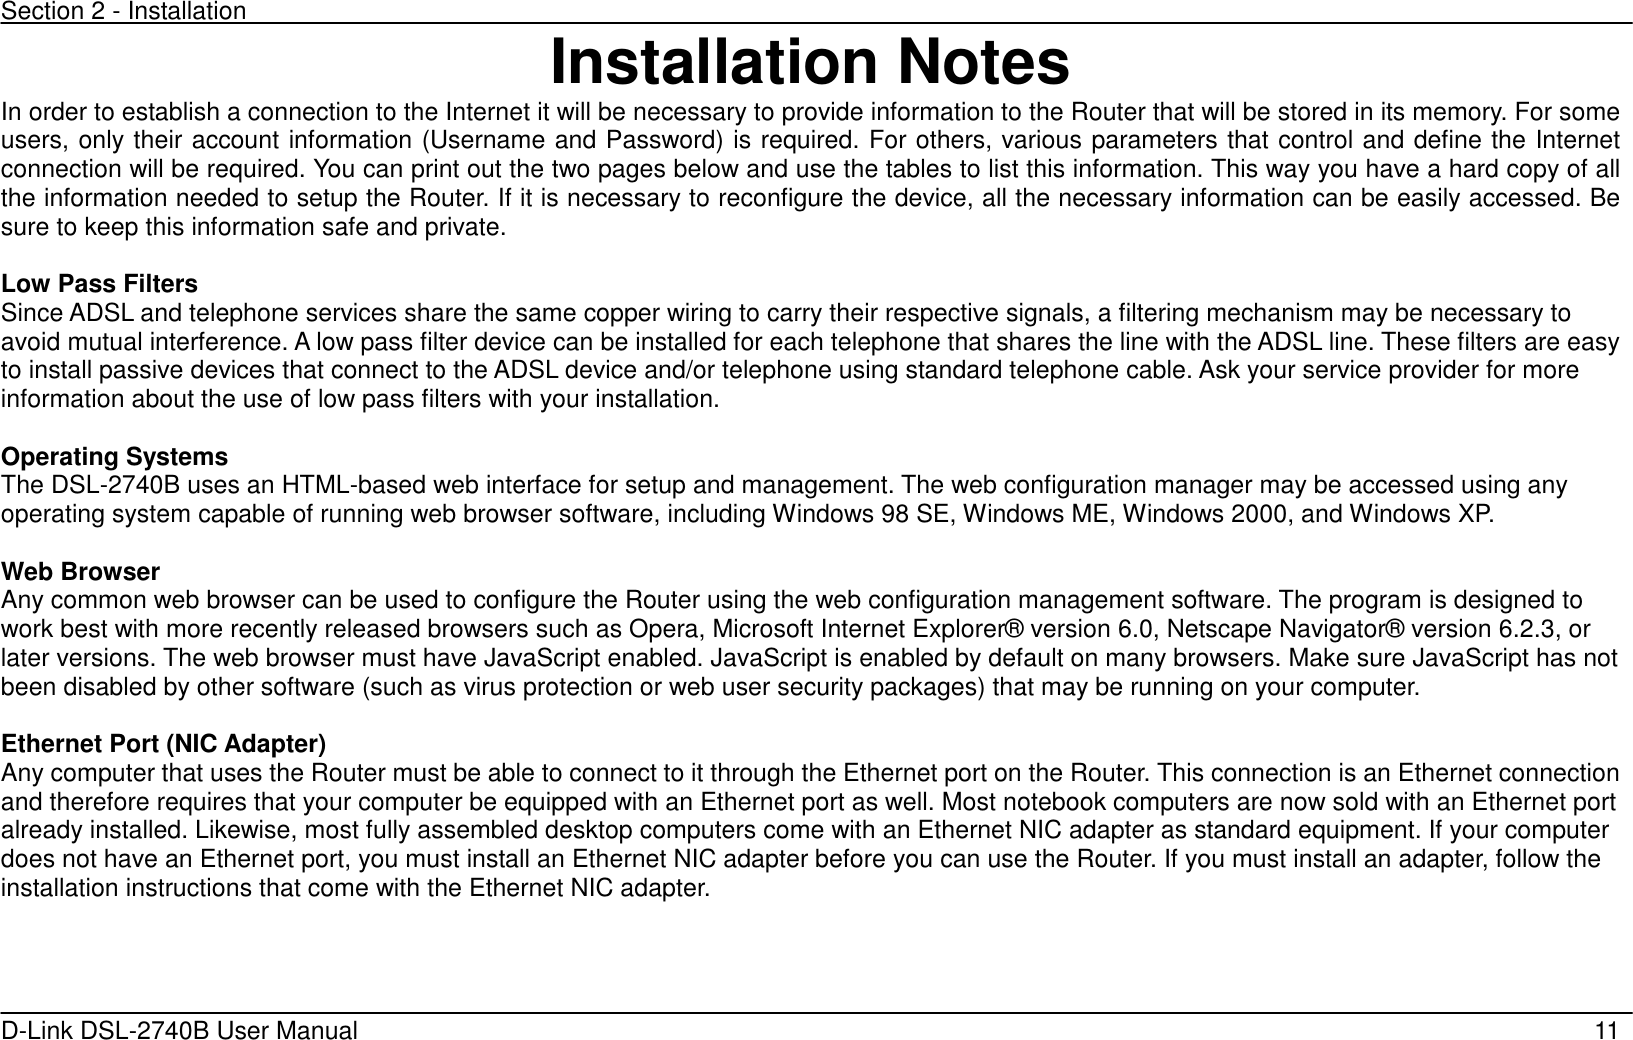 Section 2 - Installation   D-Link DSL-2740B User Manual                                                  11 Installation Notes In order to establish a connection to the Internet it will be necessary to provide information to the Router that will be stored in its memory. For some users, only their account information (Username and Password) is required. For others, various parameters that control and define the Internet connection will be required. You can print out the two pages below and use the tables to list this information. This way you have a hard copy of all the information needed to setup the Router. If it is necessary to reconfigure the device, all the necessary information can be easily accessed. Be sure to keep this information safe and private.  Low Pass Filters Since ADSL and telephone services share the same copper wiring to carry their respective signals, a filtering mechanism may be necessary to avoid mutual interference. A low pass filter device can be installed for each telephone that shares the line with the ADSL line. These filters are easy to install passive devices that connect to the ADSL device and/or telephone using standard telephone cable. Ask your service provider for more information about the use of low pass filters with your installation.    Operating Systems The DSL-2740B uses an HTML-based web interface for setup and management. The web configuration manager may be accessed using any operating system capable of running web browser software, including Windows 98 SE, Windows ME, Windows 2000, and Windows XP.    Web Browser Any common web browser can be used to configure the Router using the web configuration management software. The program is designed to work best with more recently released browsers such as Opera, Microsoft Internet Explorer® version 6.0, Netscape Navigator® version 6.2.3, or later versions. The web browser must have JavaScript enabled. JavaScript is enabled by default on many browsers. Make sure JavaScript has not been disabled by other software (such as virus protection or web user security packages) that may be running on your computer.  Ethernet Port (NIC Adapter) Any computer that uses the Router must be able to connect to it through the Ethernet port on the Router. This connection is an Ethernet connection and therefore requires that your computer be equipped with an Ethernet port as well. Most notebook computers are now sold with an Ethernet port already installed. Likewise, most fully assembled desktop computers come with an Ethernet NIC adapter as standard equipment. If your computer does not have an Ethernet port, you must install an Ethernet NIC adapter before you can use the Router. If you must install an adapter, follow the installation instructions that come with the Ethernet NIC adapter.      